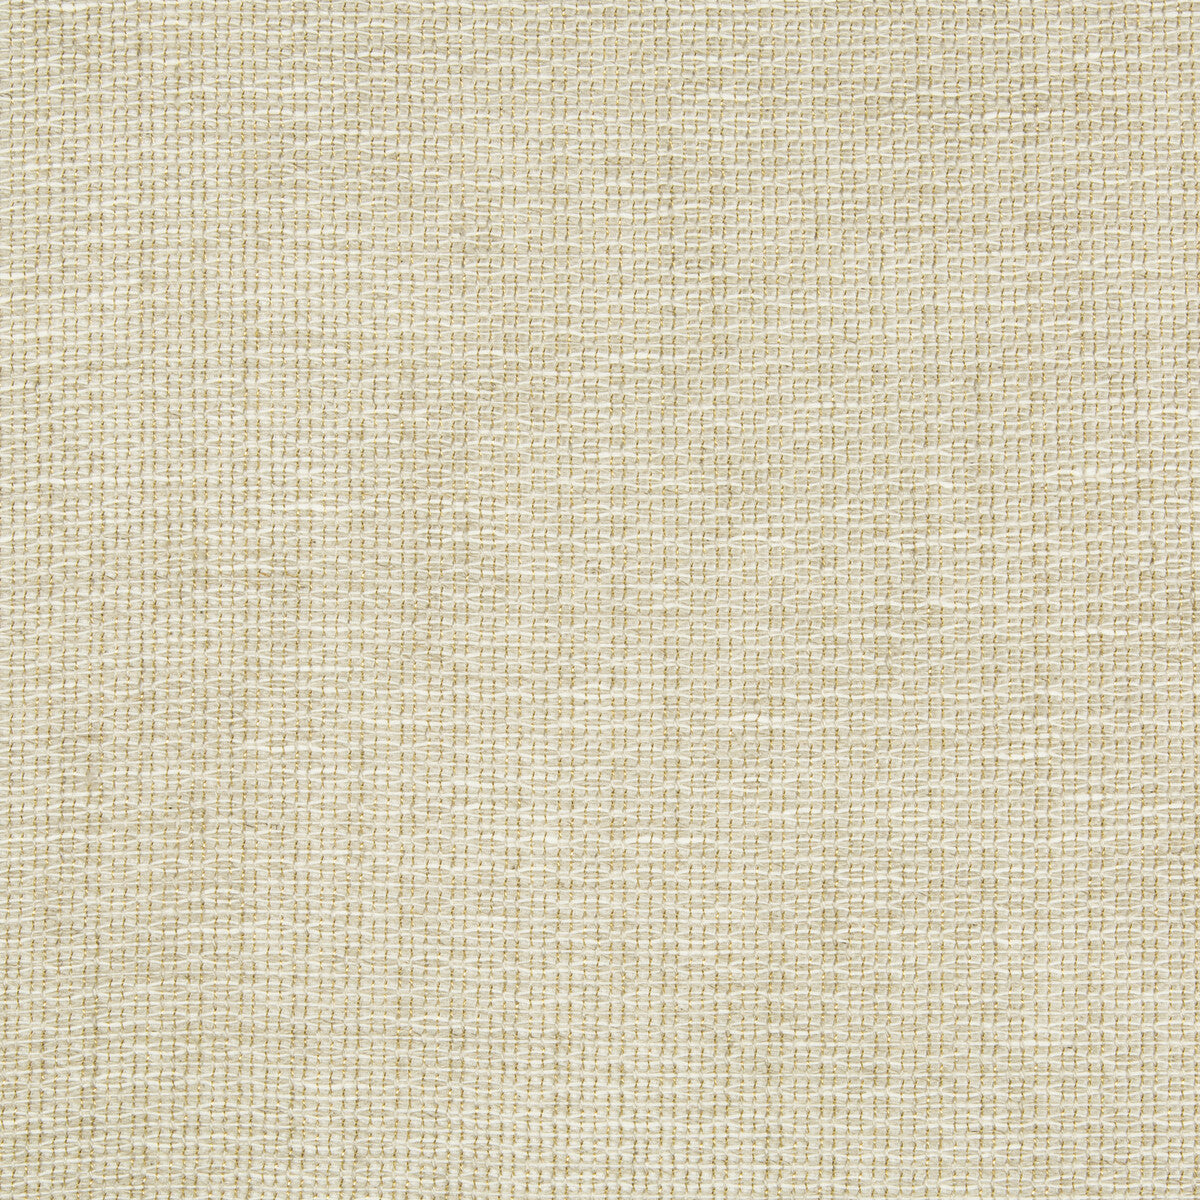 Minerale fabric in gilt color - pattern 4247.416.0 - by Kravet Couture in the Calvin Klein Home collection